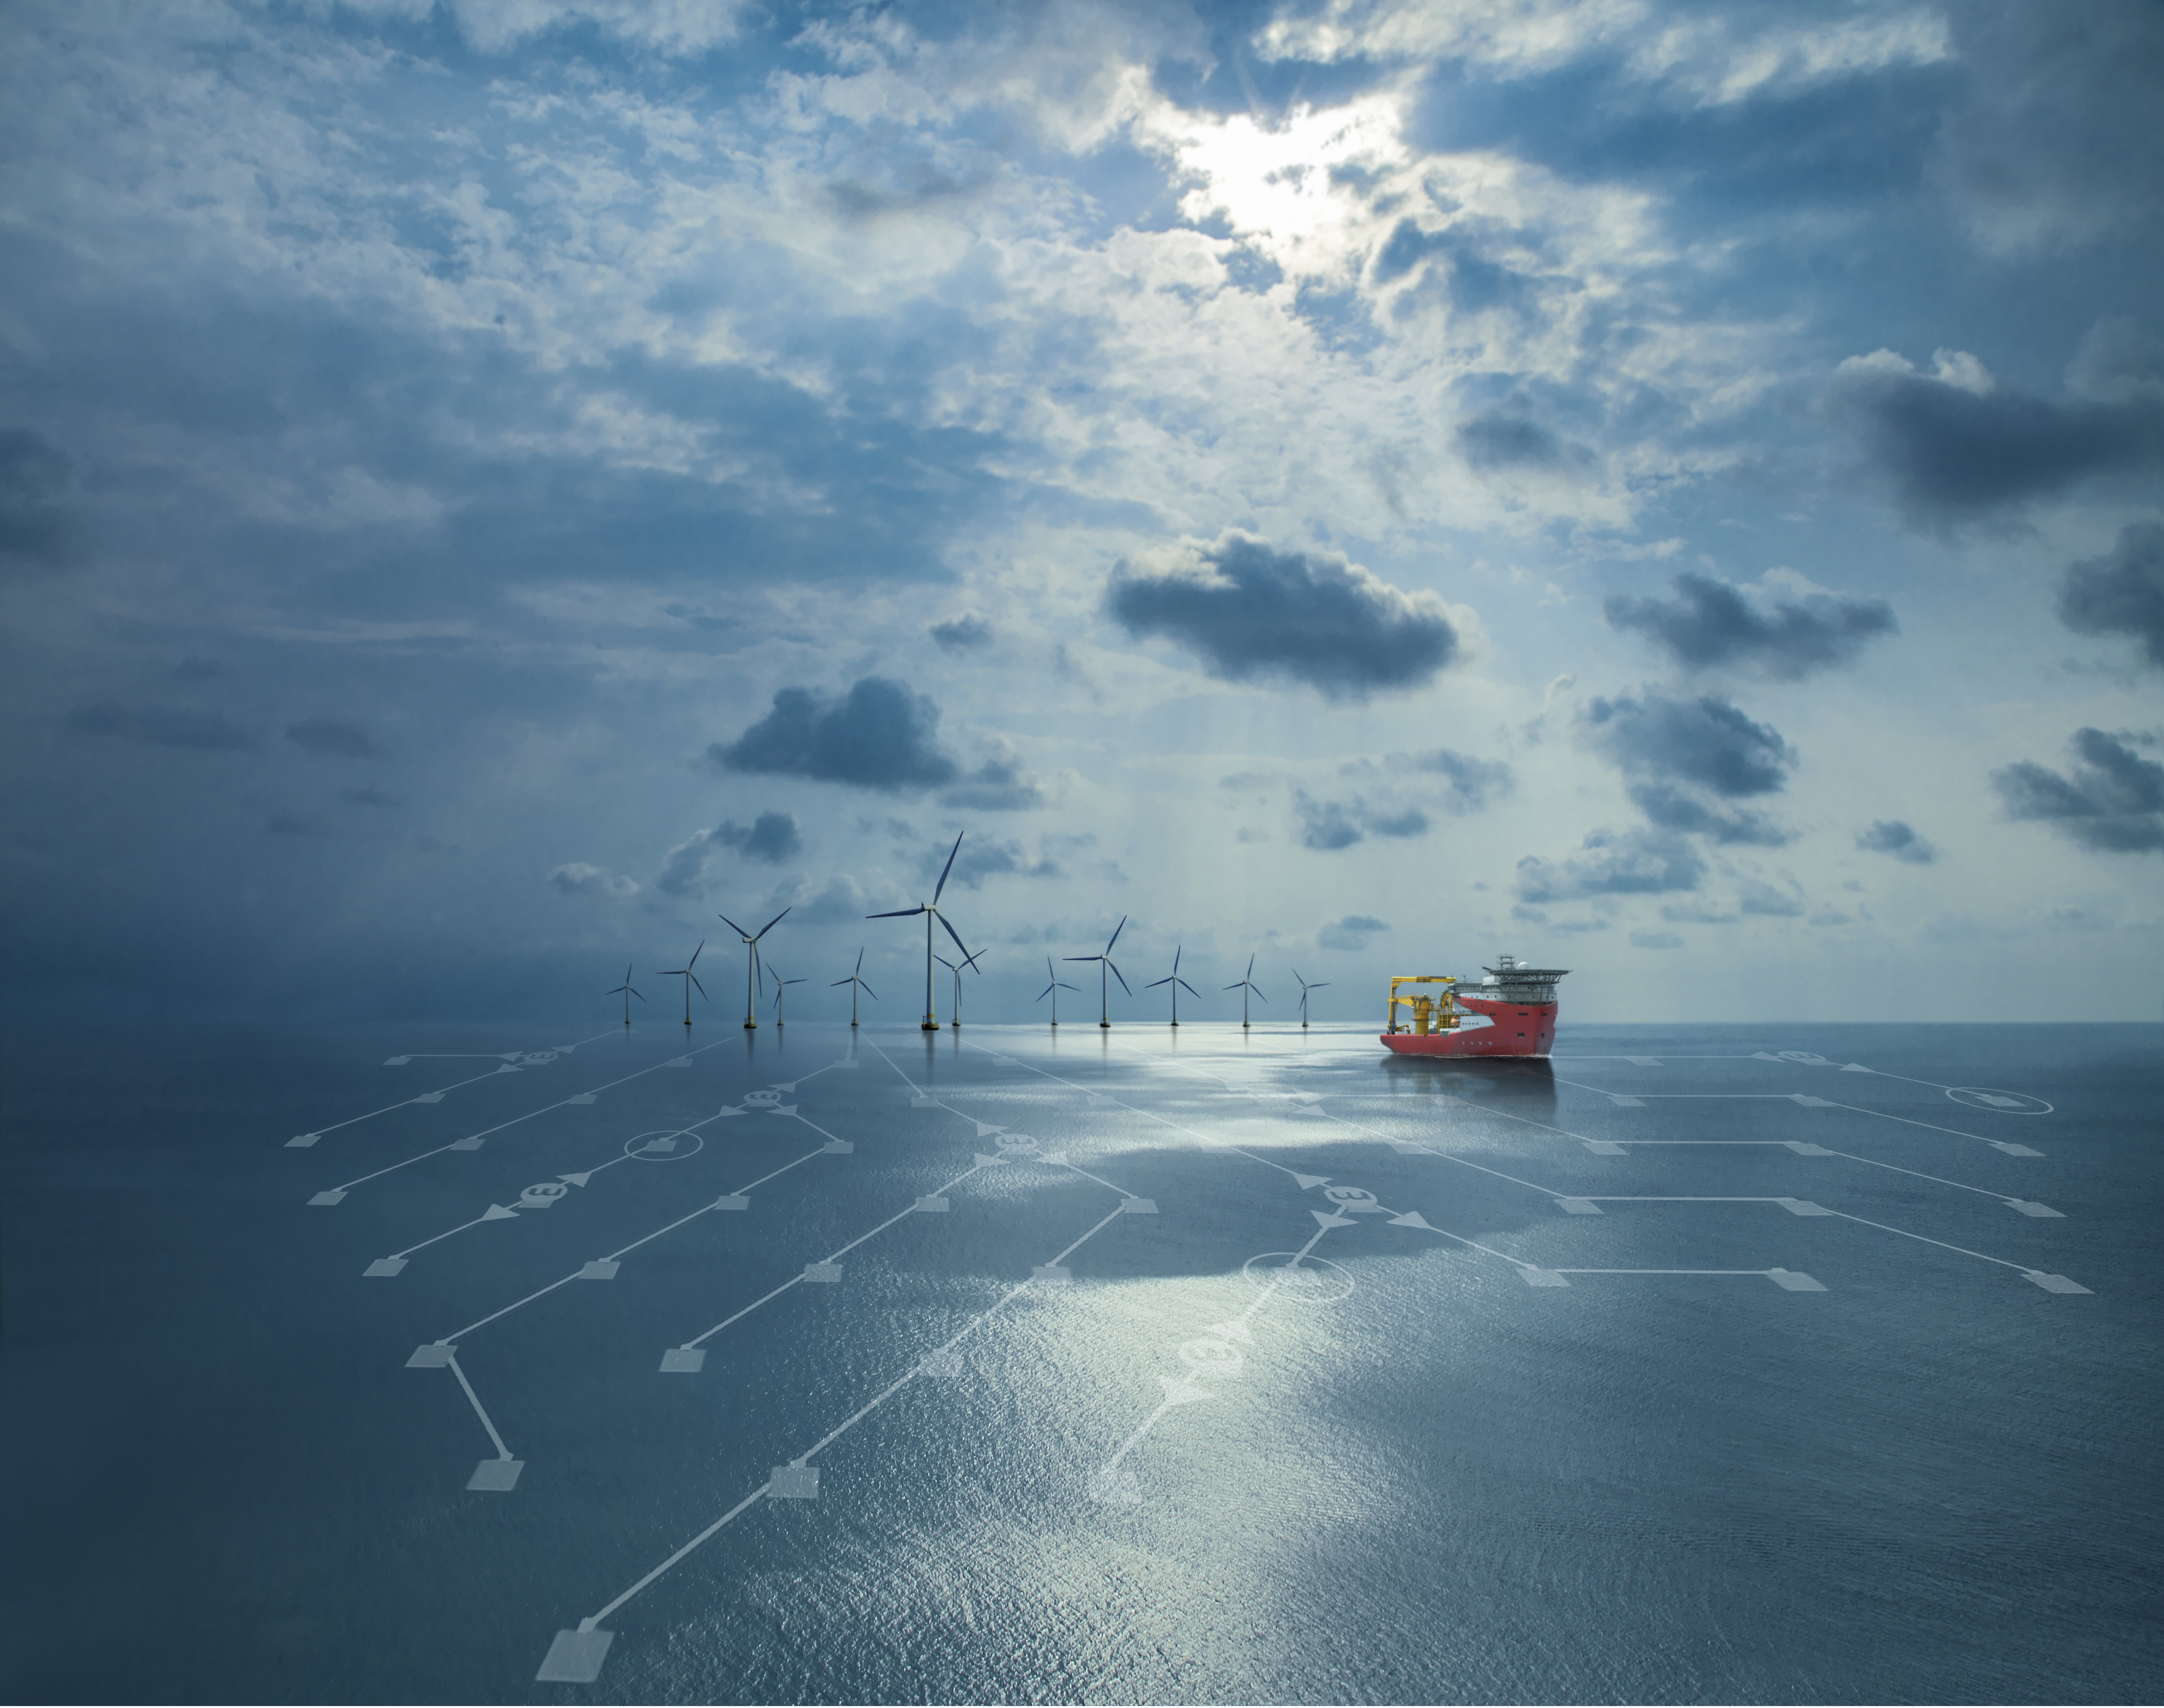 Vessel at Sea, with windpark, visual offshore energy